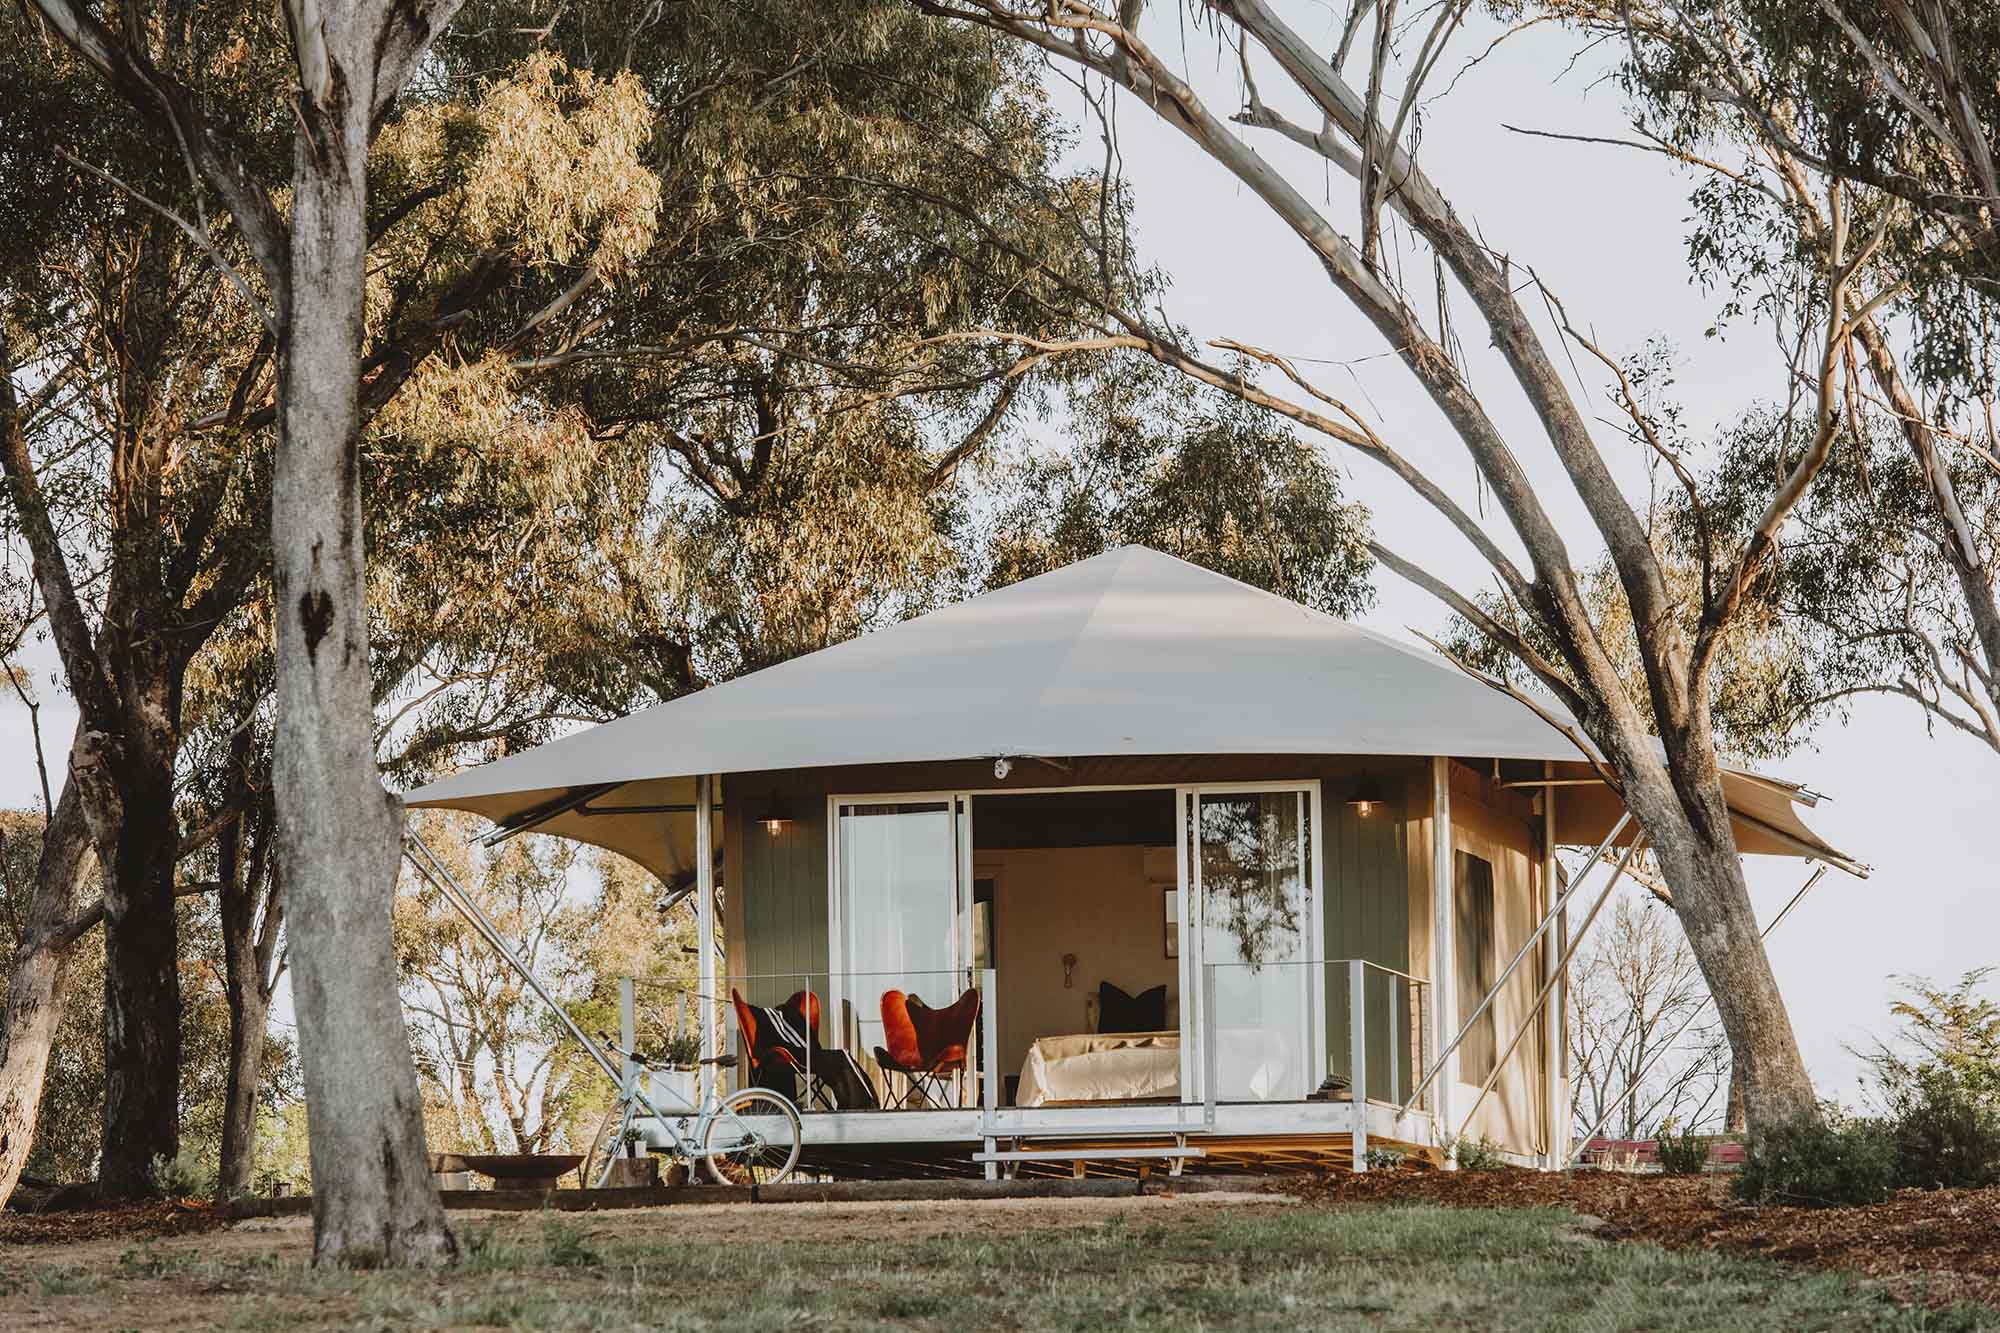 Luxury eco-glamping accommodation in Mudgee